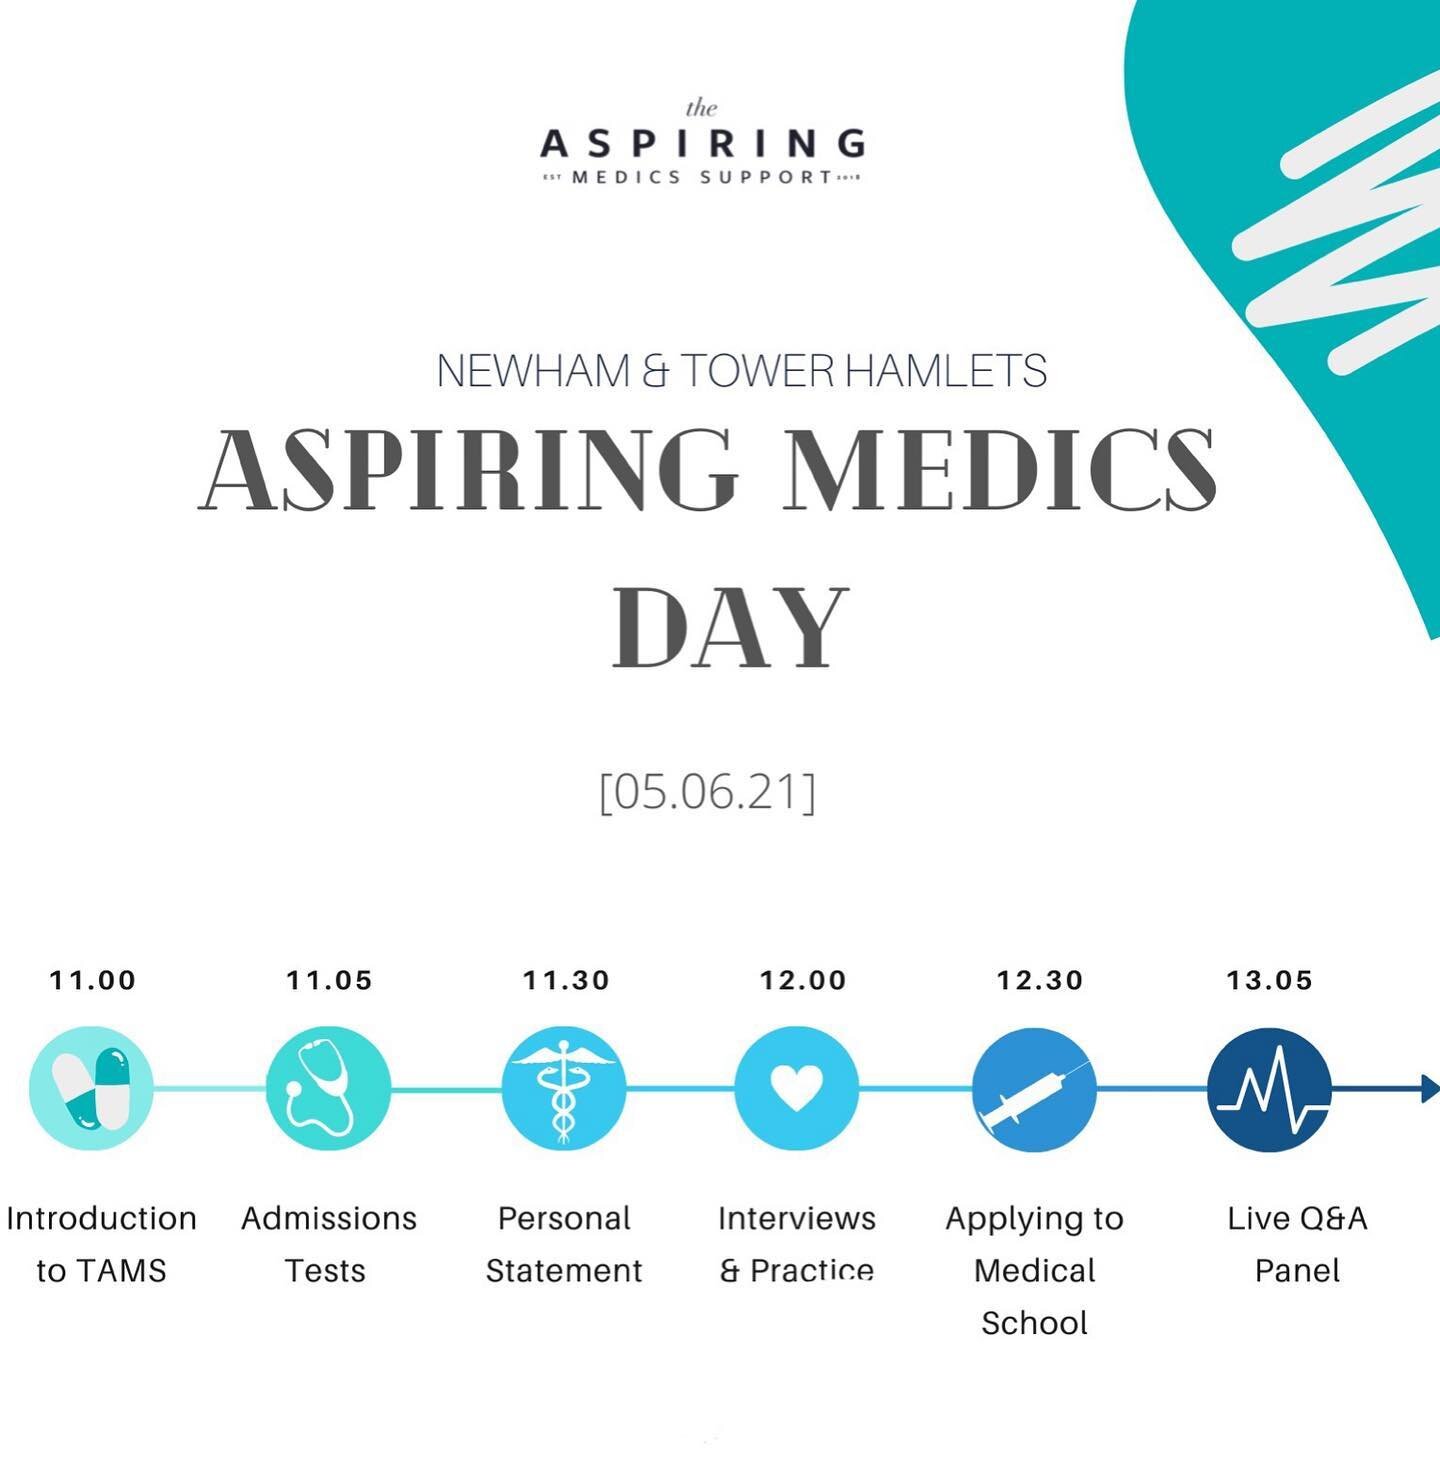 Timeline for tomorrow&rsquo;s Aspiring Medic&rsquo;s Day!